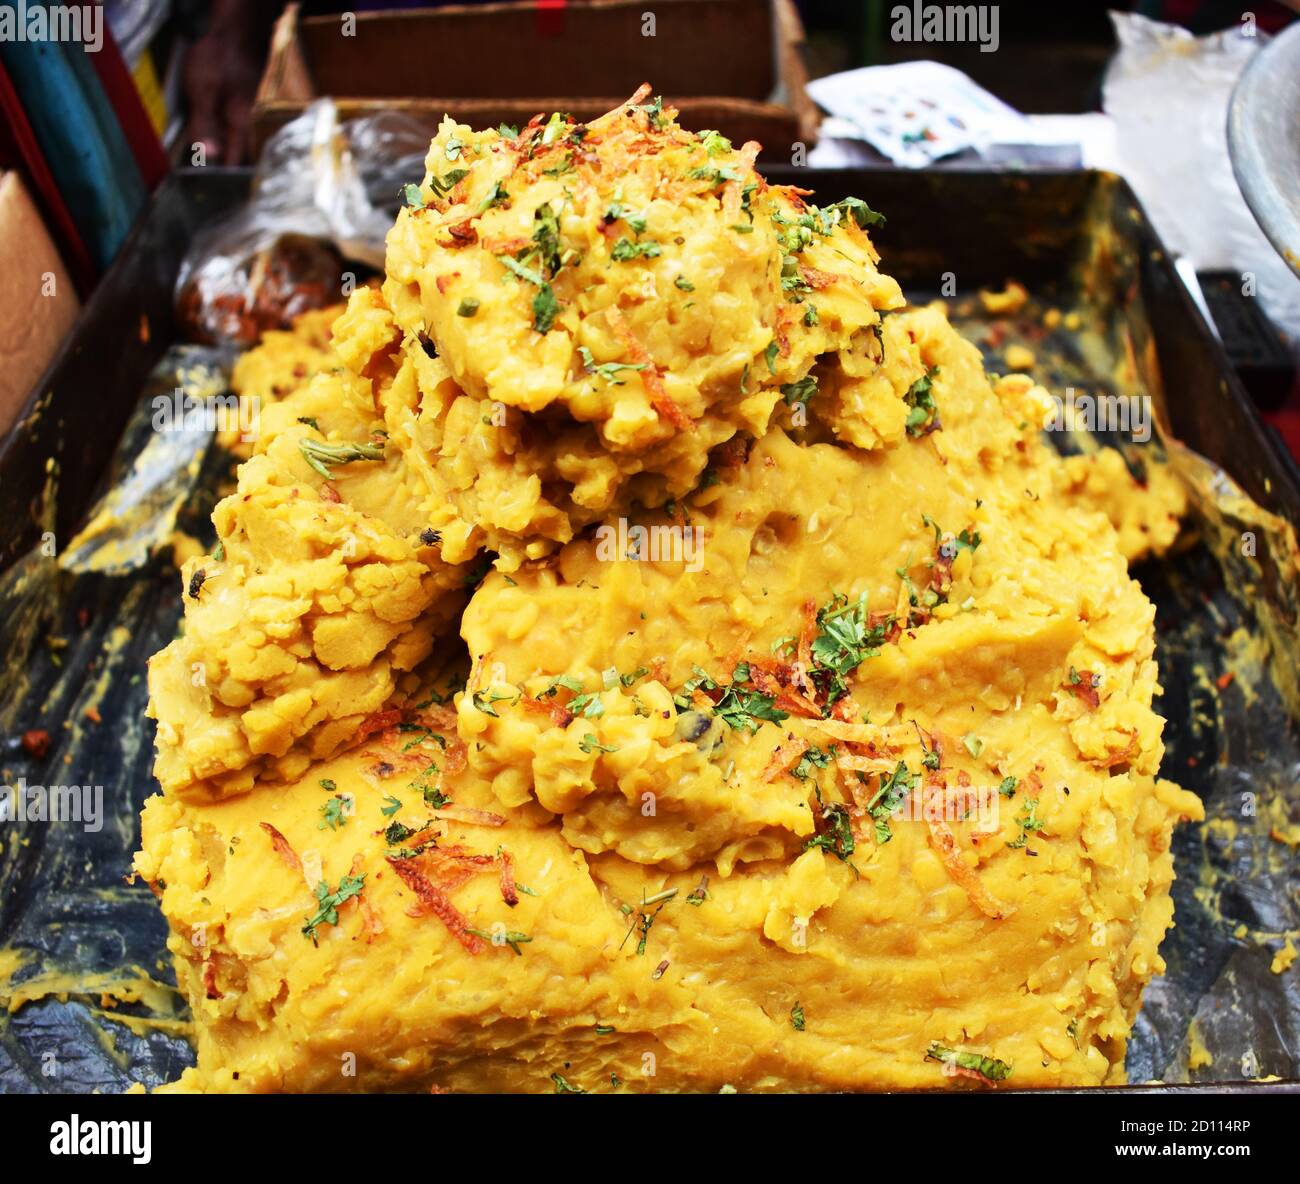 Chickpea delicious famous food in old Dhaka, Chickpea seeds are high in protein, Street junk food closeup view at India Stock Photo